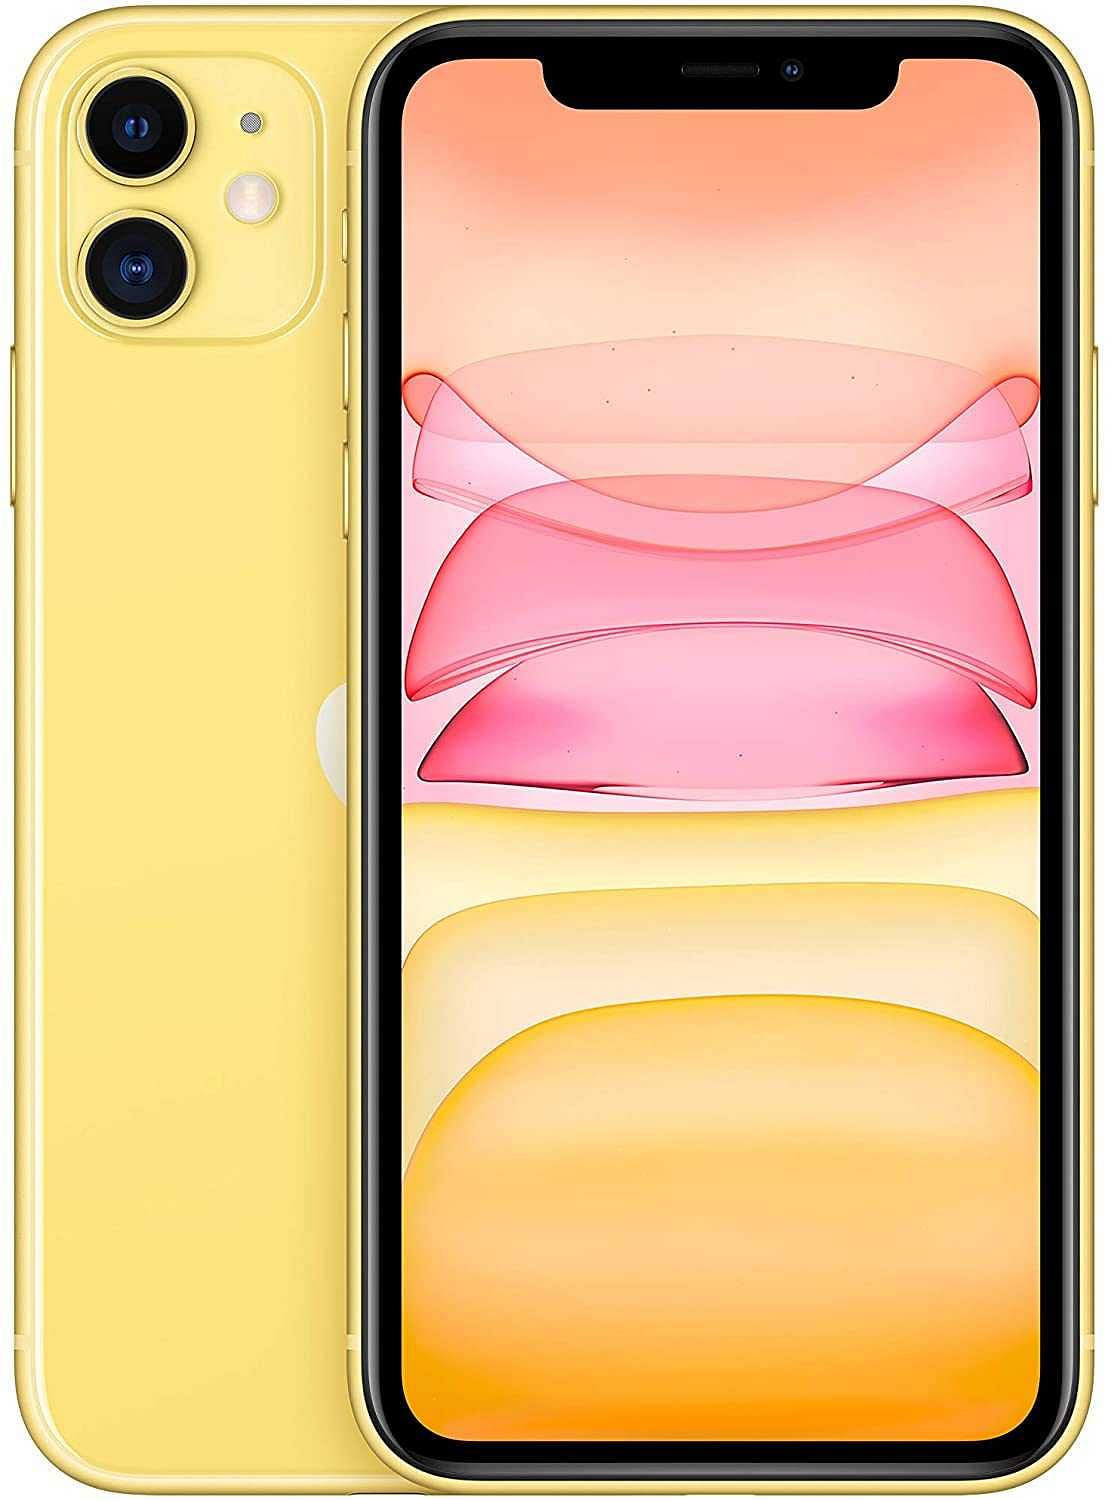 Apple iPhone 11 with FaceTime - 128GB, 4G LTE, Yellow